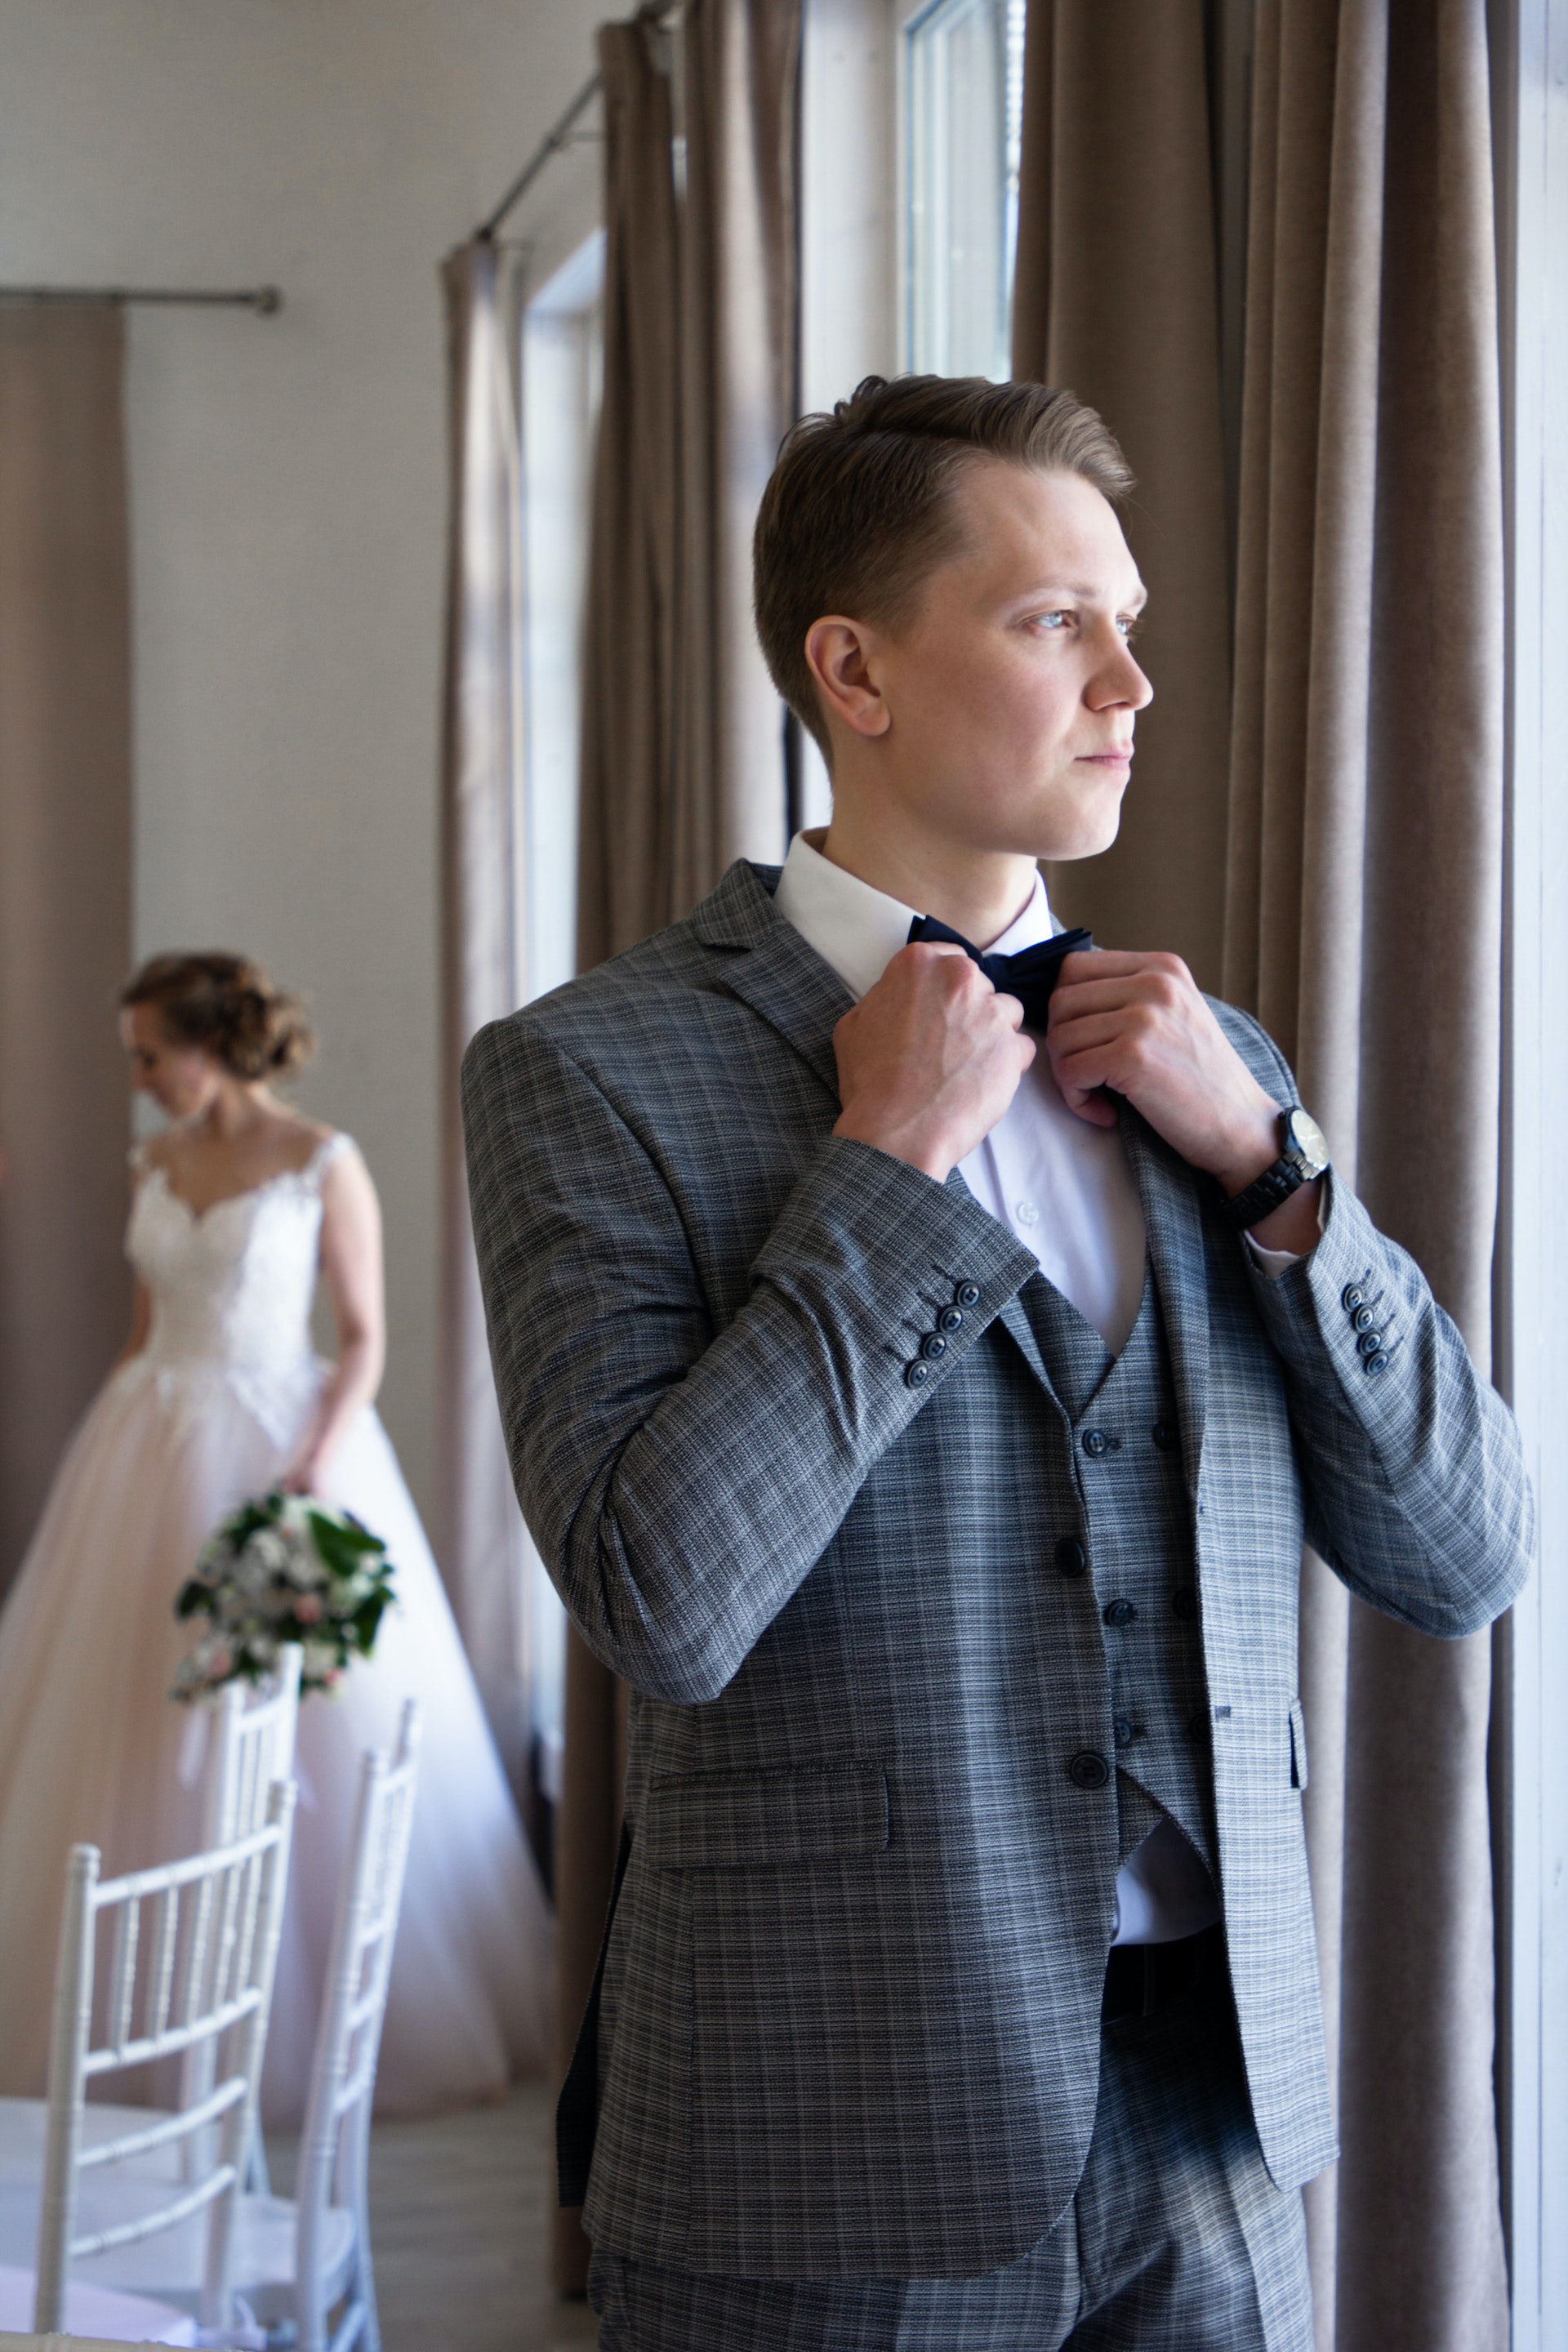 A groom looking outside a window with his bride standing in the background | Source: Pexels